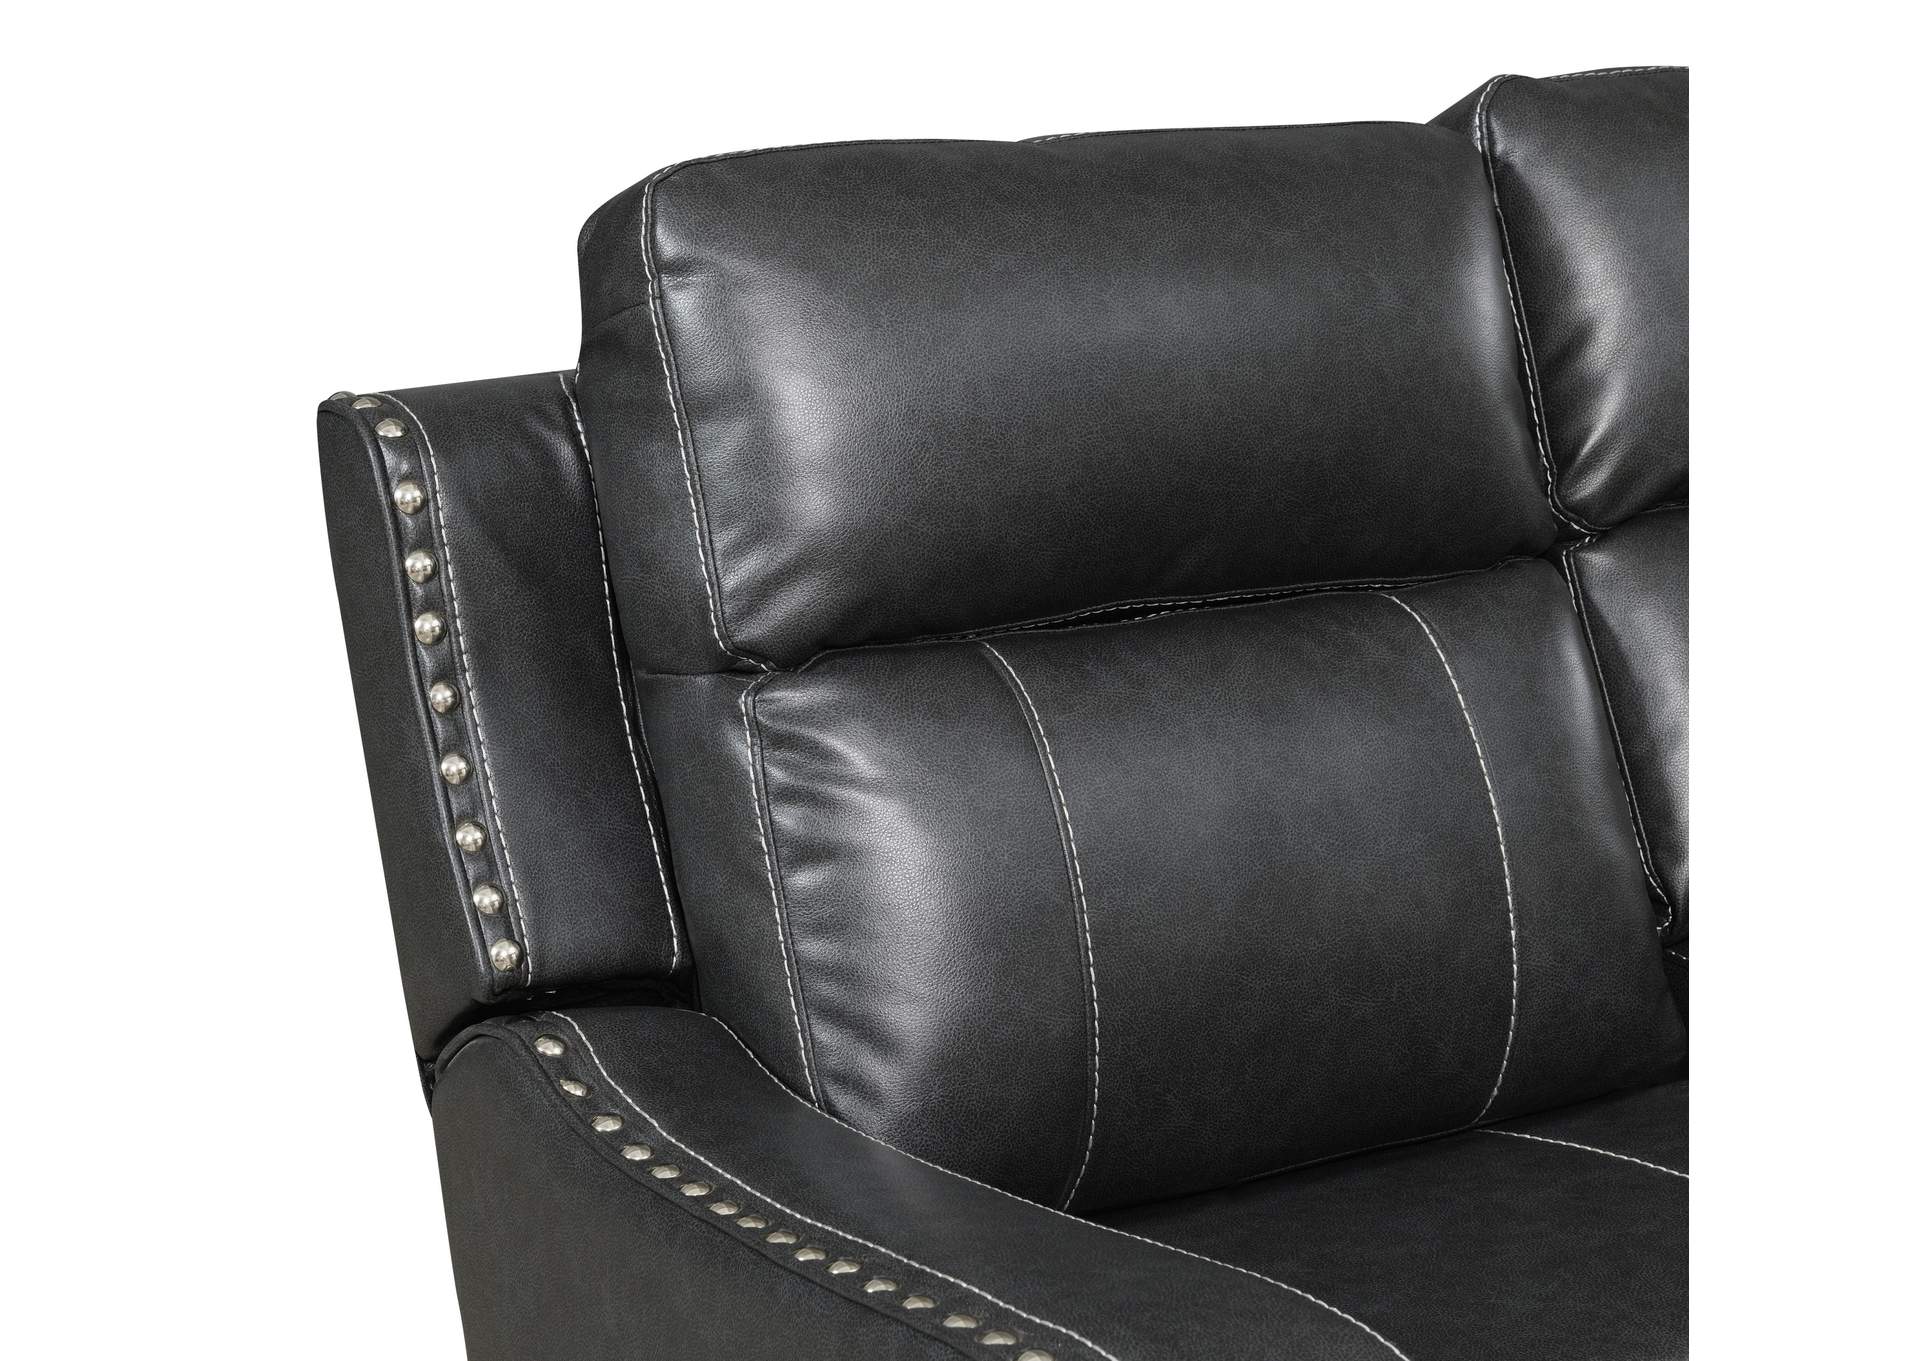 Charcoal Console Reclining Loveseat,Global Furniture USA